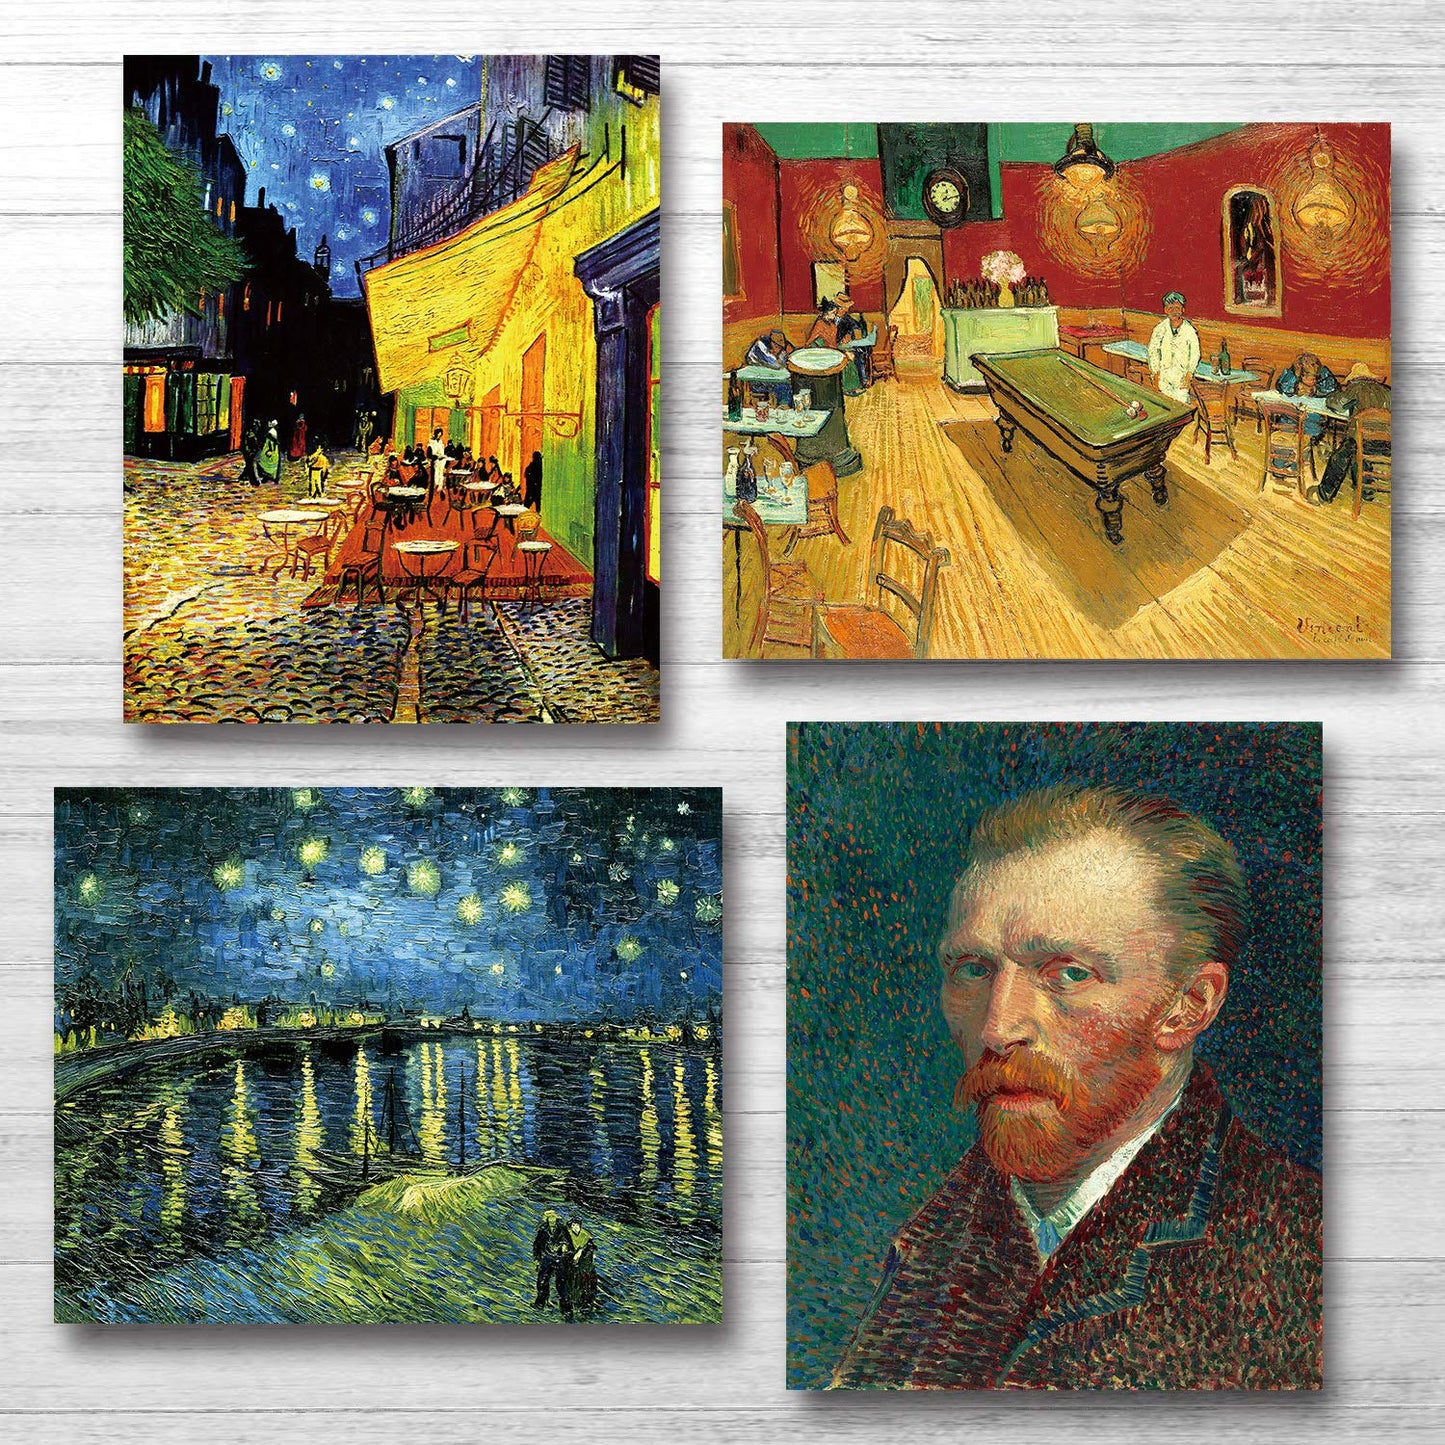 YASEN Van Gogh Canvas Wall Art Posters And Prints Of Famous Painting Abstract Wall Art Prints Unframed Art 8x10 Vincent Van Gogh Poster Artwork (4 Pack B)